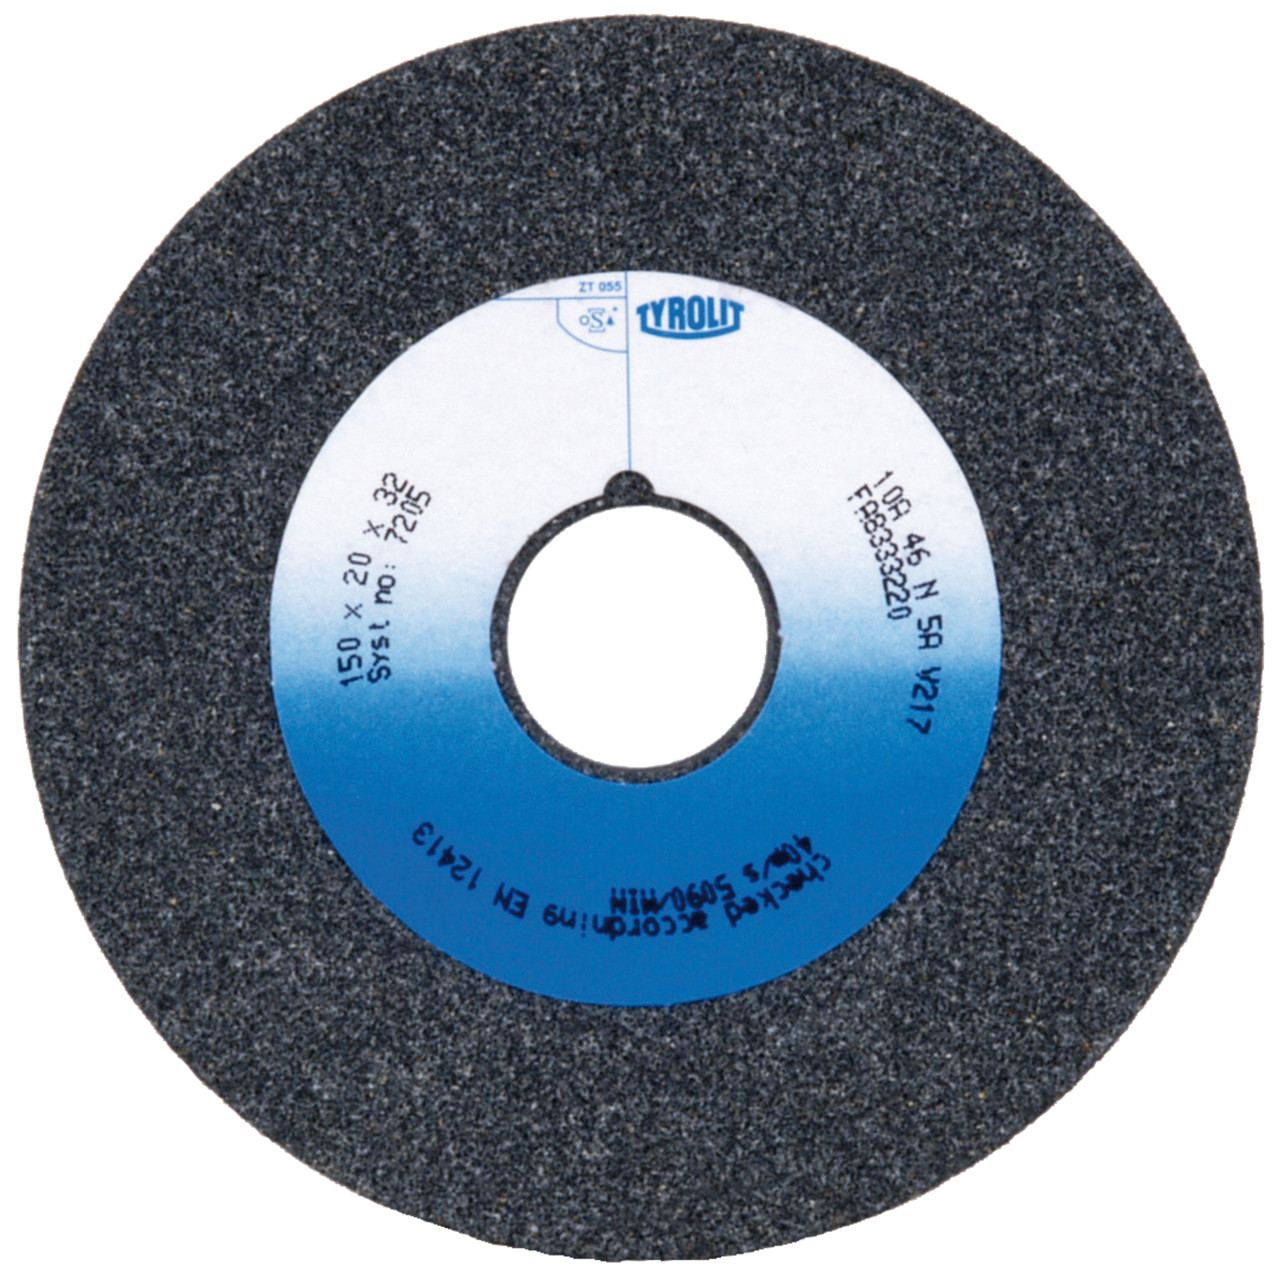 Tyrolit Conventional ceramic grinding discs DxDxH 350x50x127 For unalloyed and low-alloy steels, shape: 1, Art. 32981